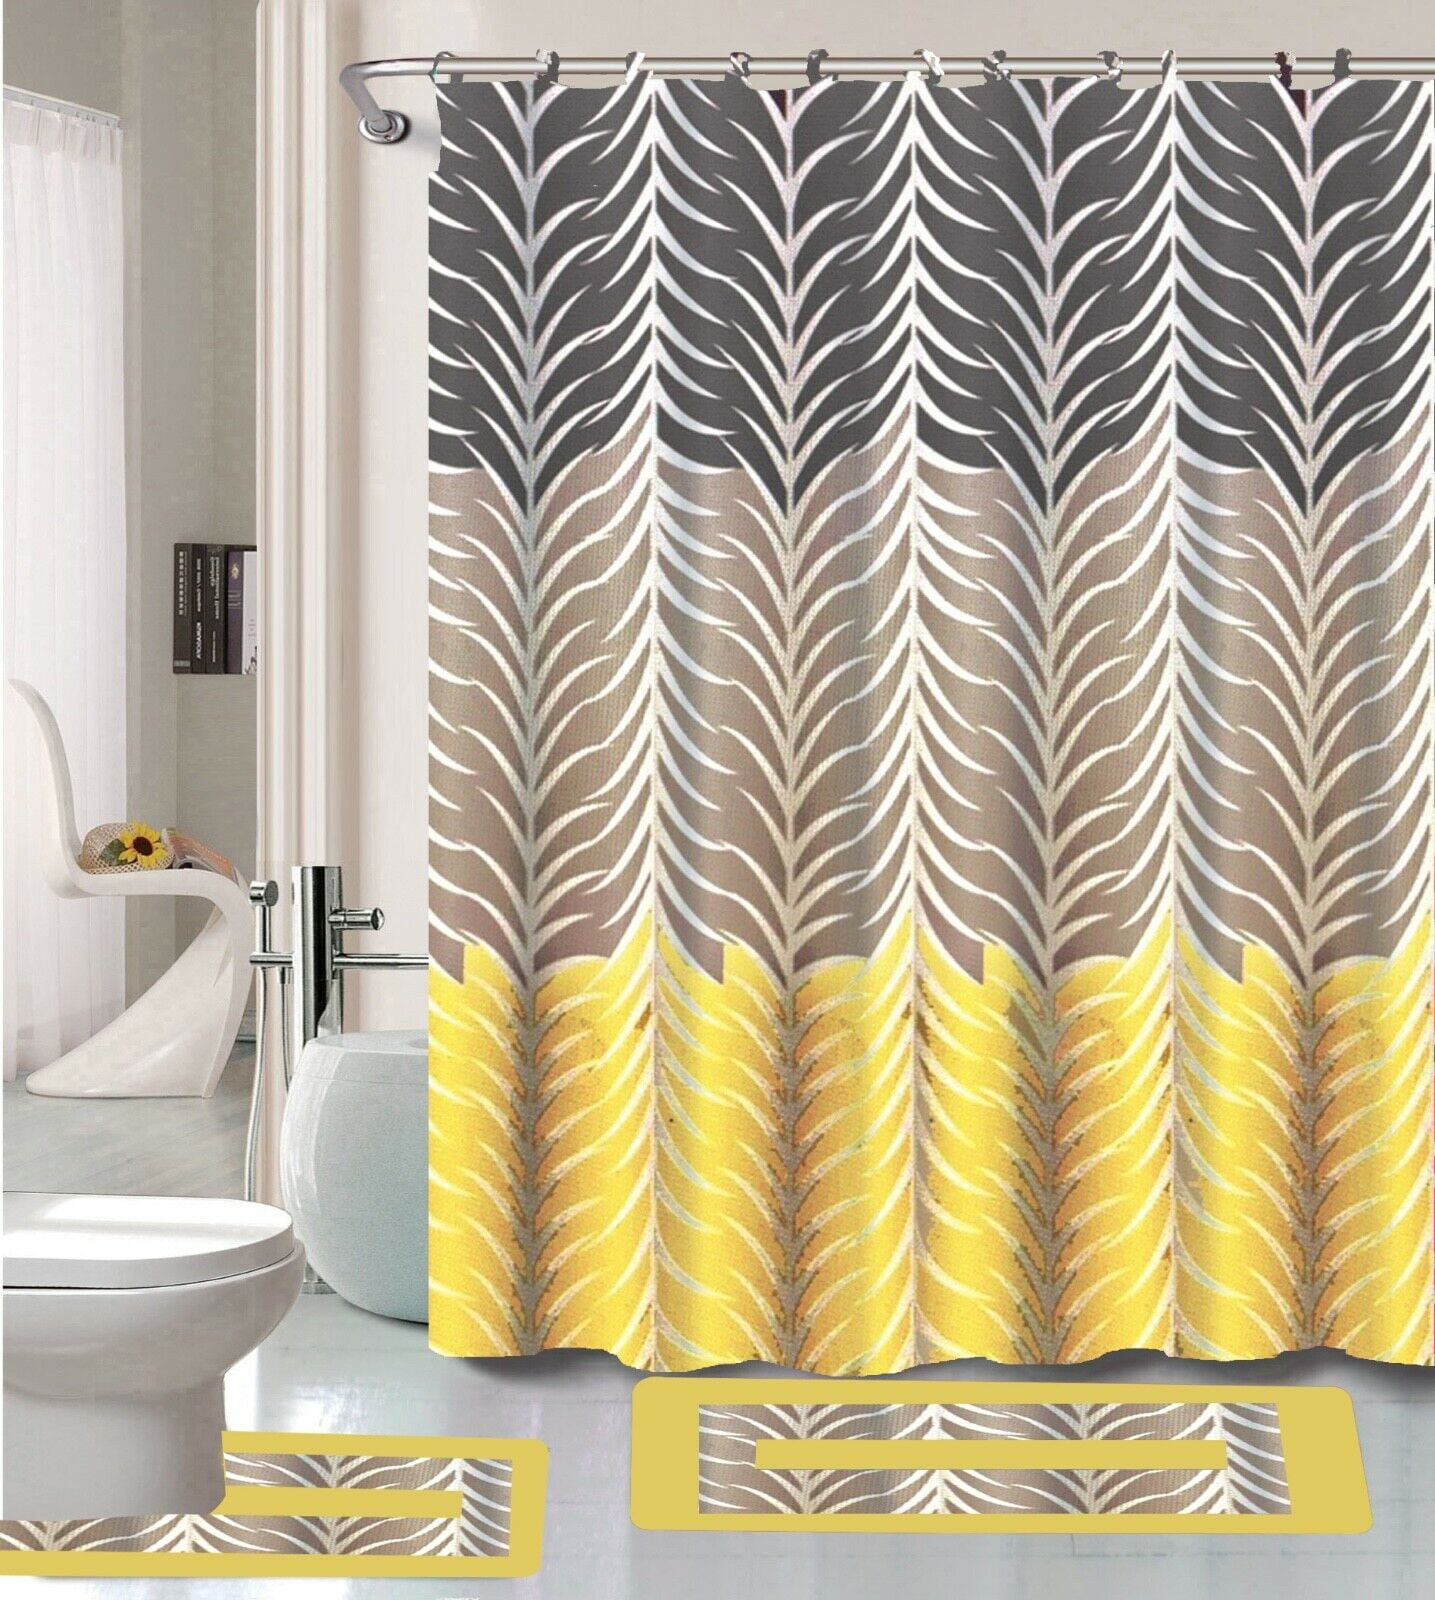 Details about   Snow and Rock Mountain Shower Curtain Set Fabric 71in 12hooks & Bath Mat 